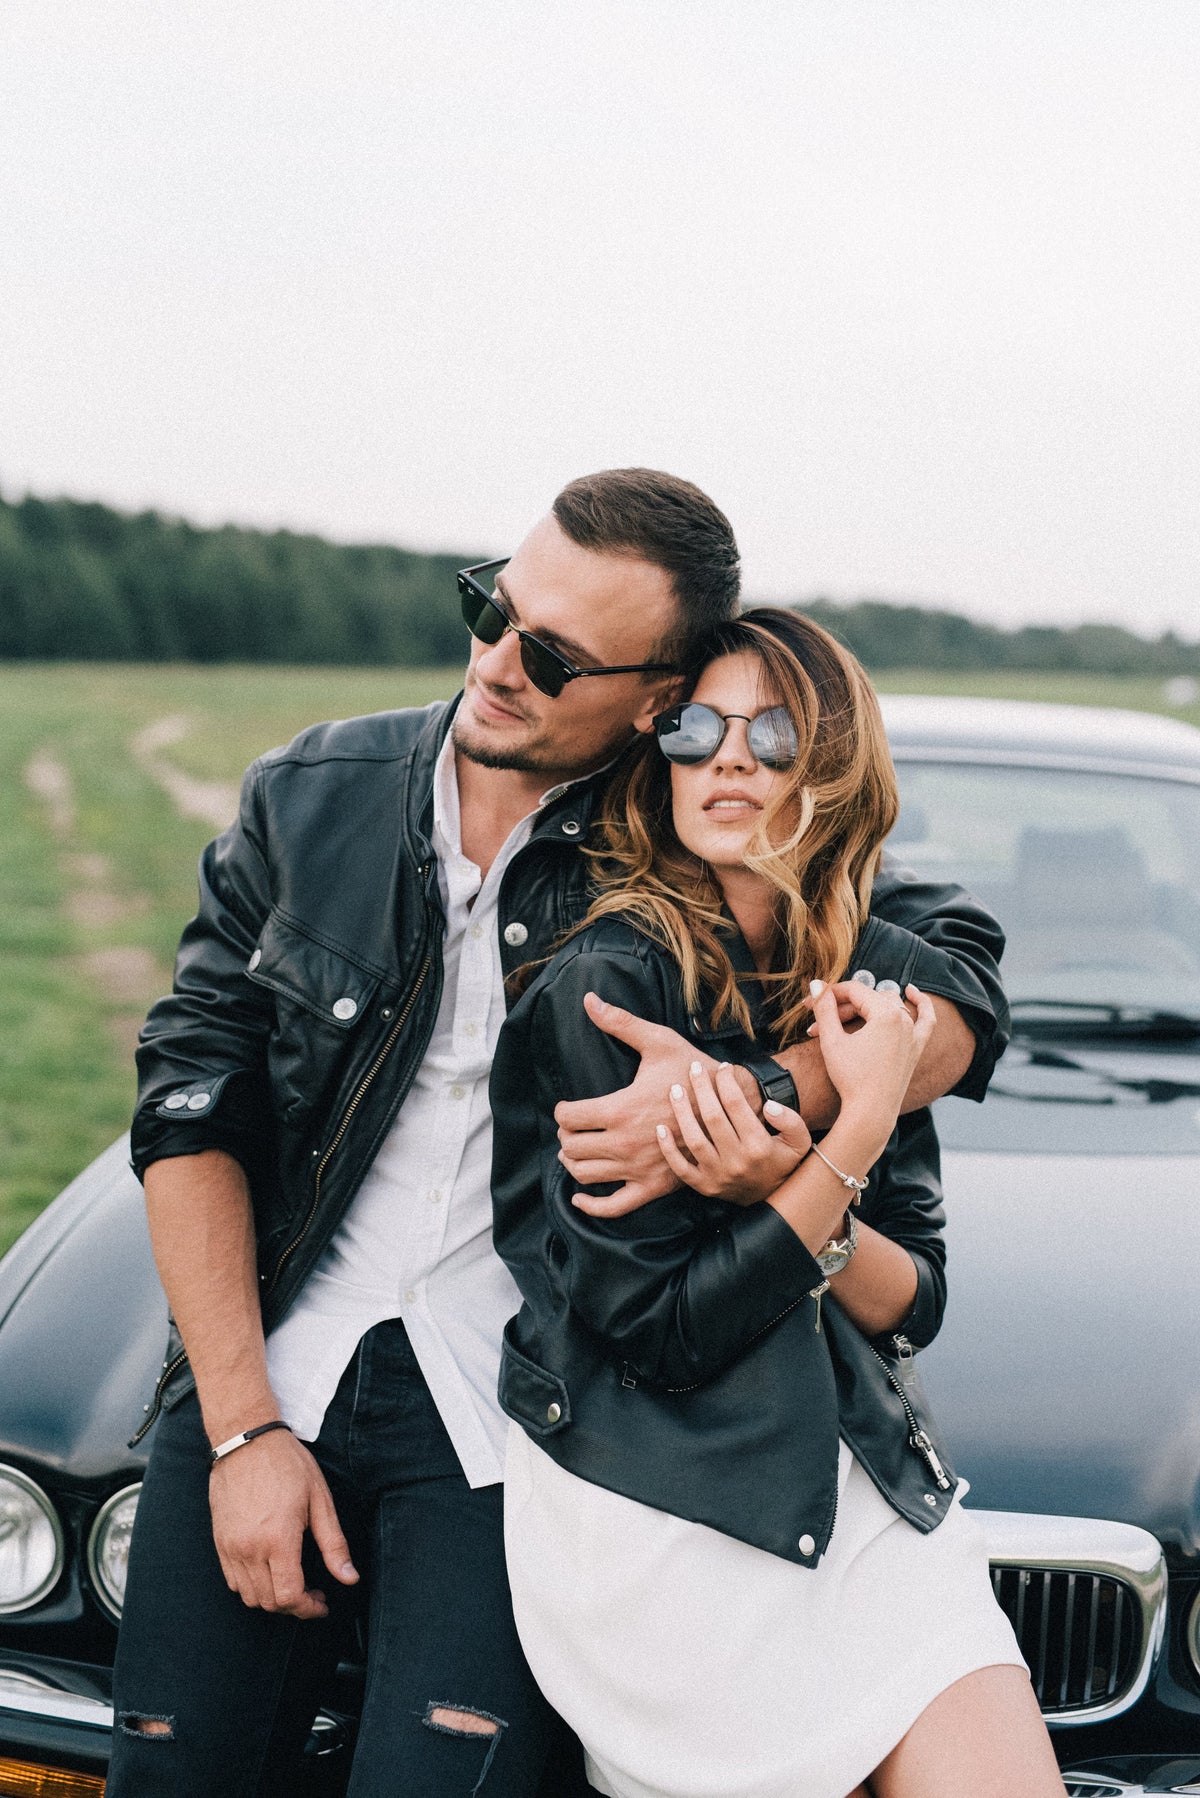 Couple on a date wearing leather jackets and leaning on a car bonnet